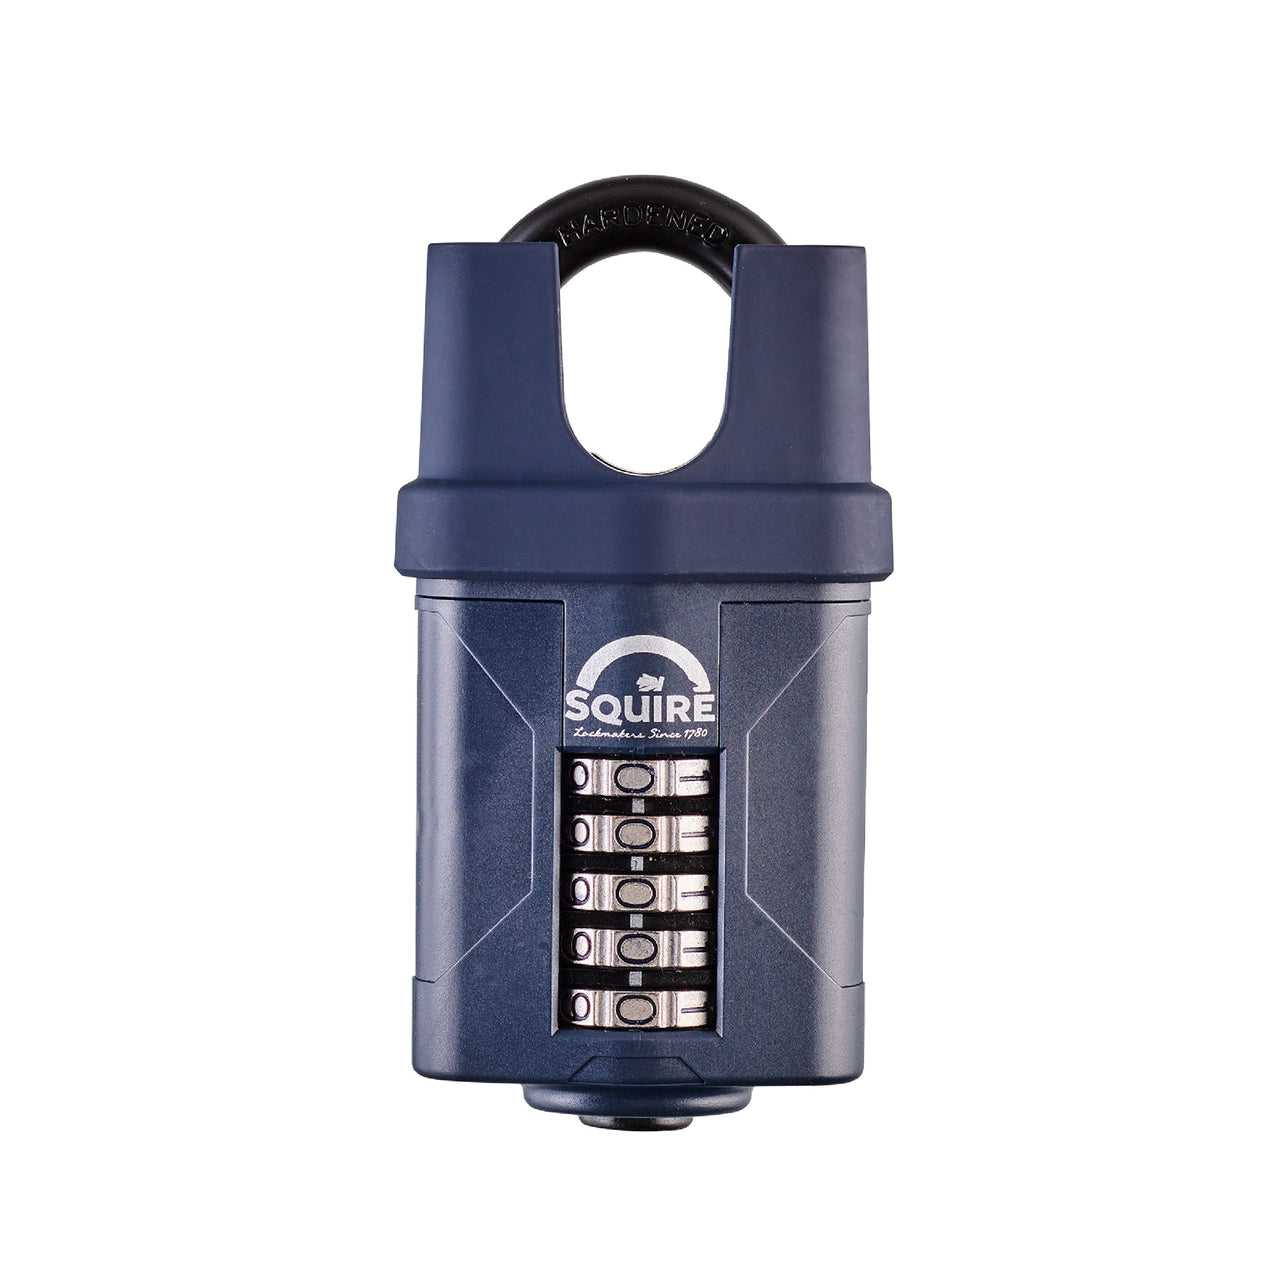 Squire CP60CS Heavy Duty All Weather Combination Padlock Closed Shackle